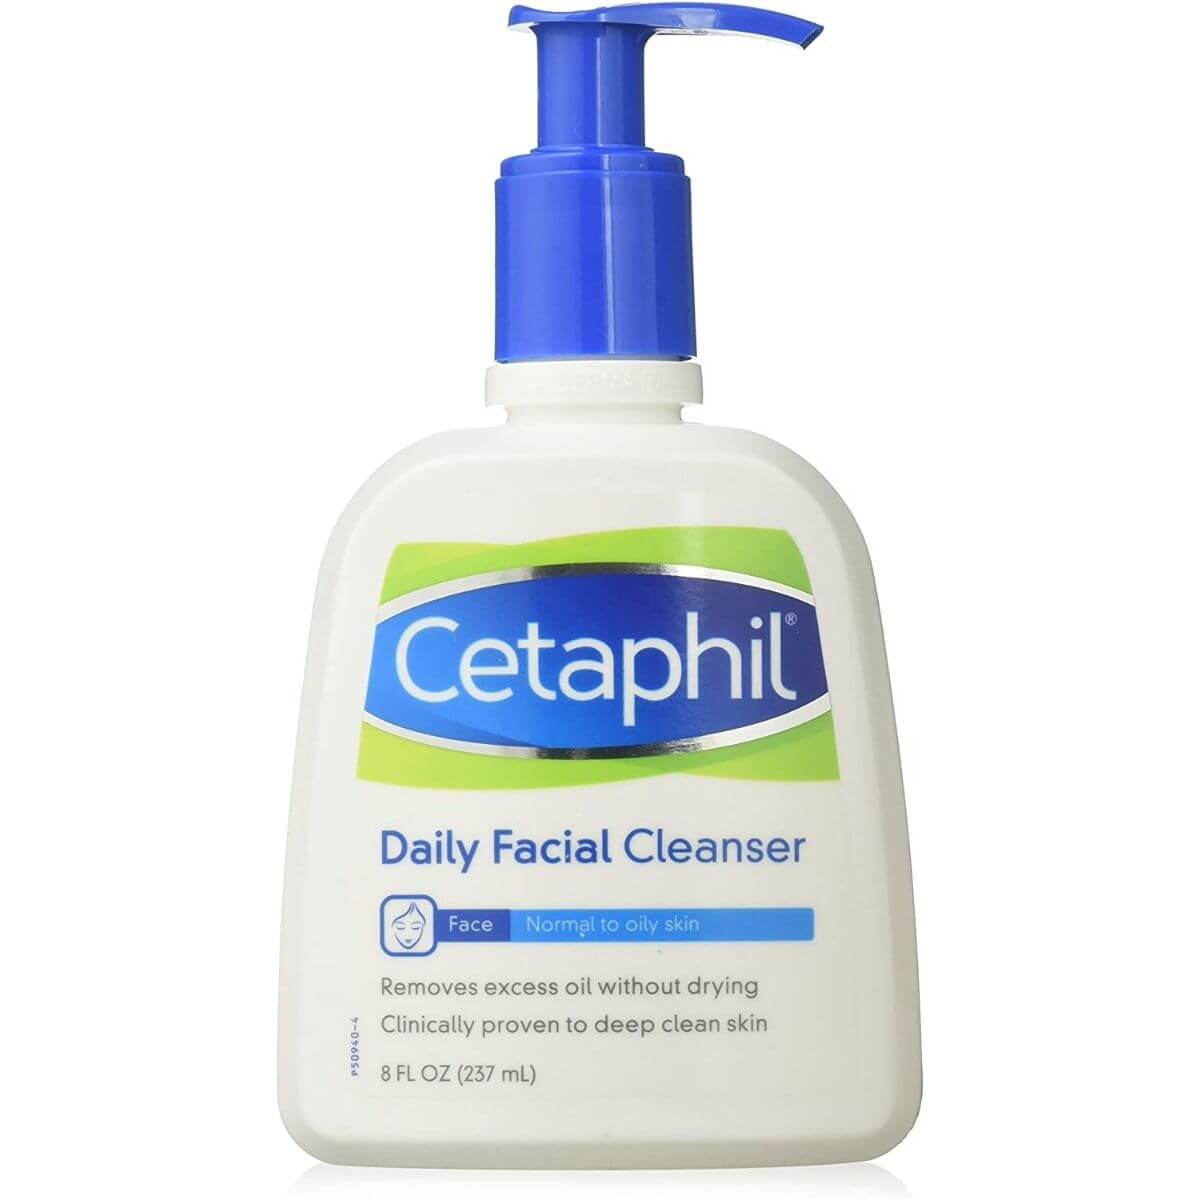 Cetaphil Daily Facial Cleanser for Normal to Oily Skin 237ml (Country of Origin: Canada)